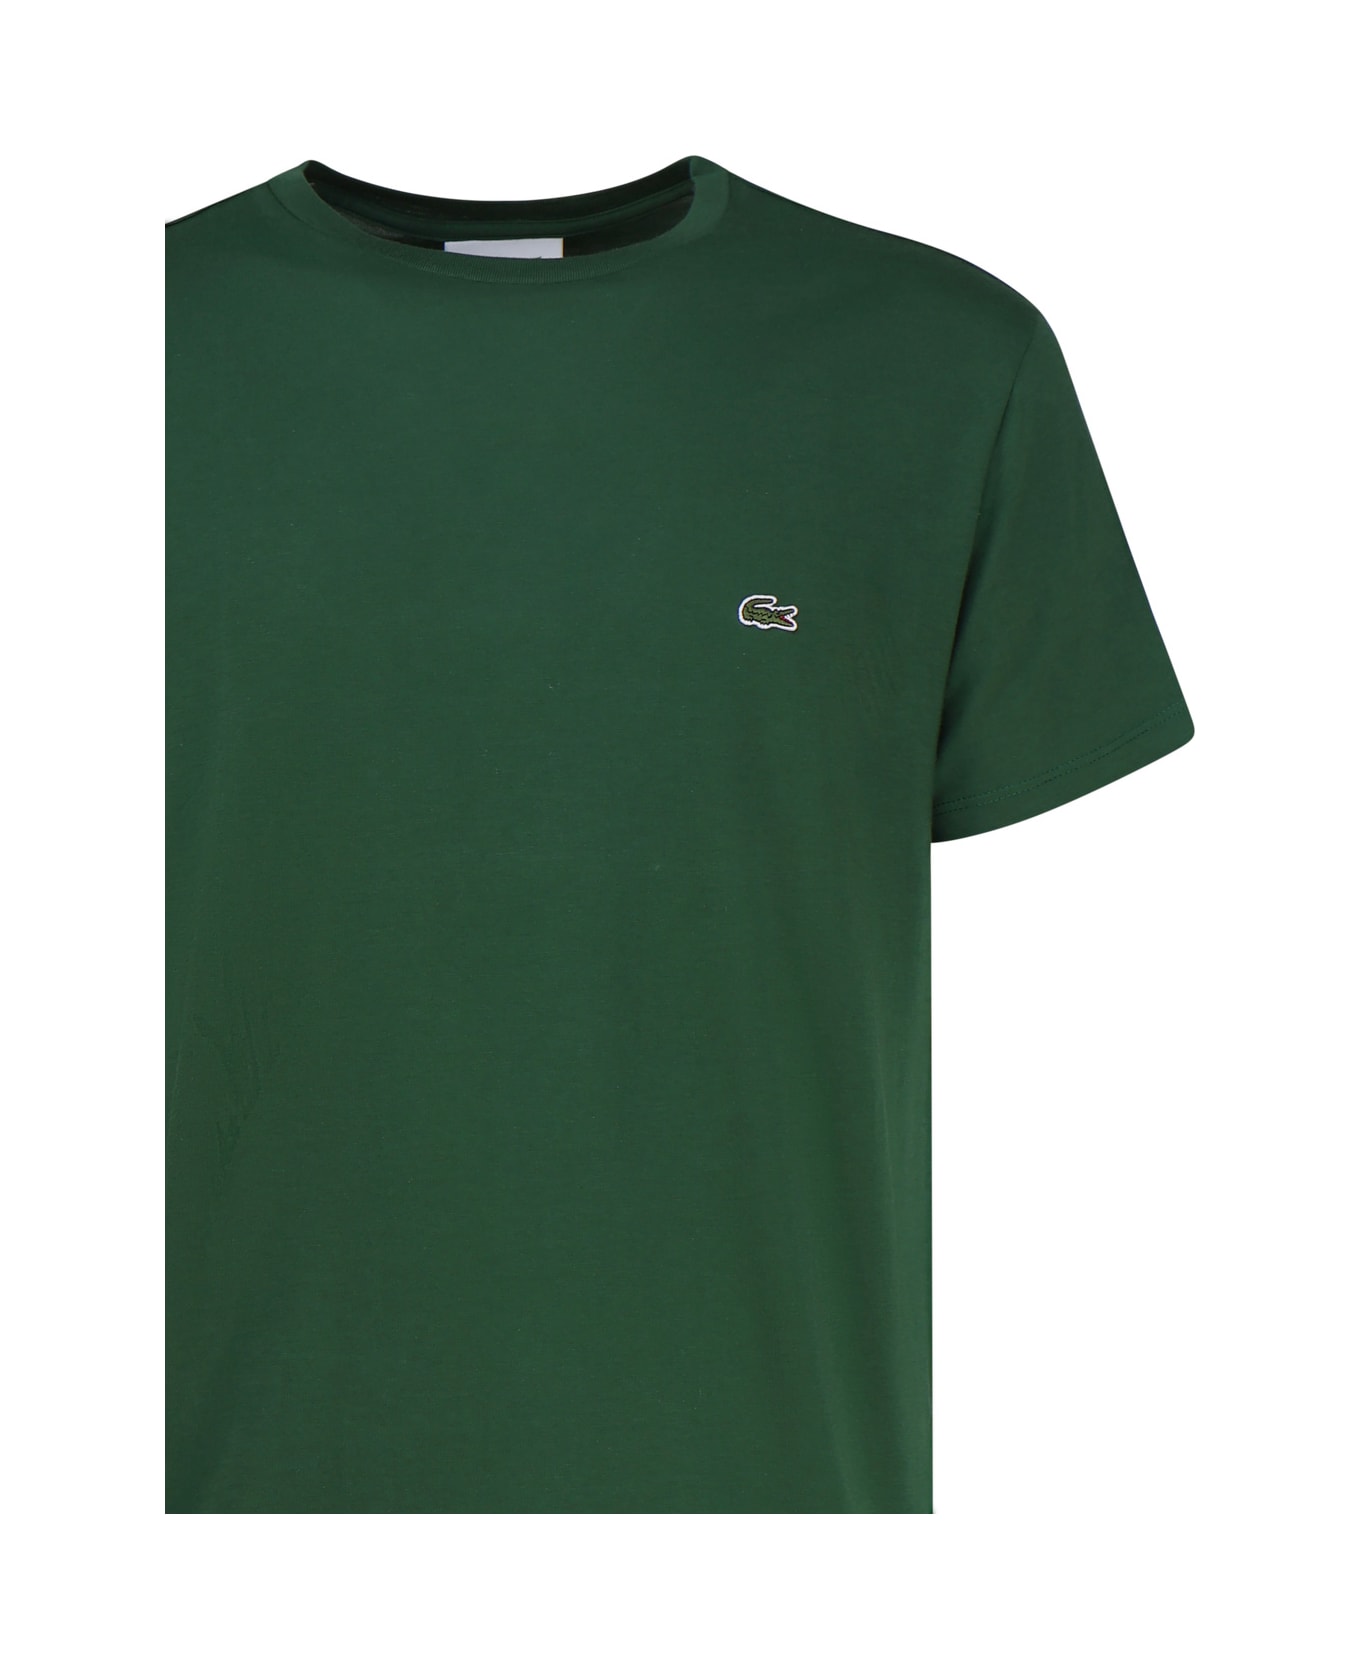 Lacoste Green T-shirt In Cotton Jersey - Green